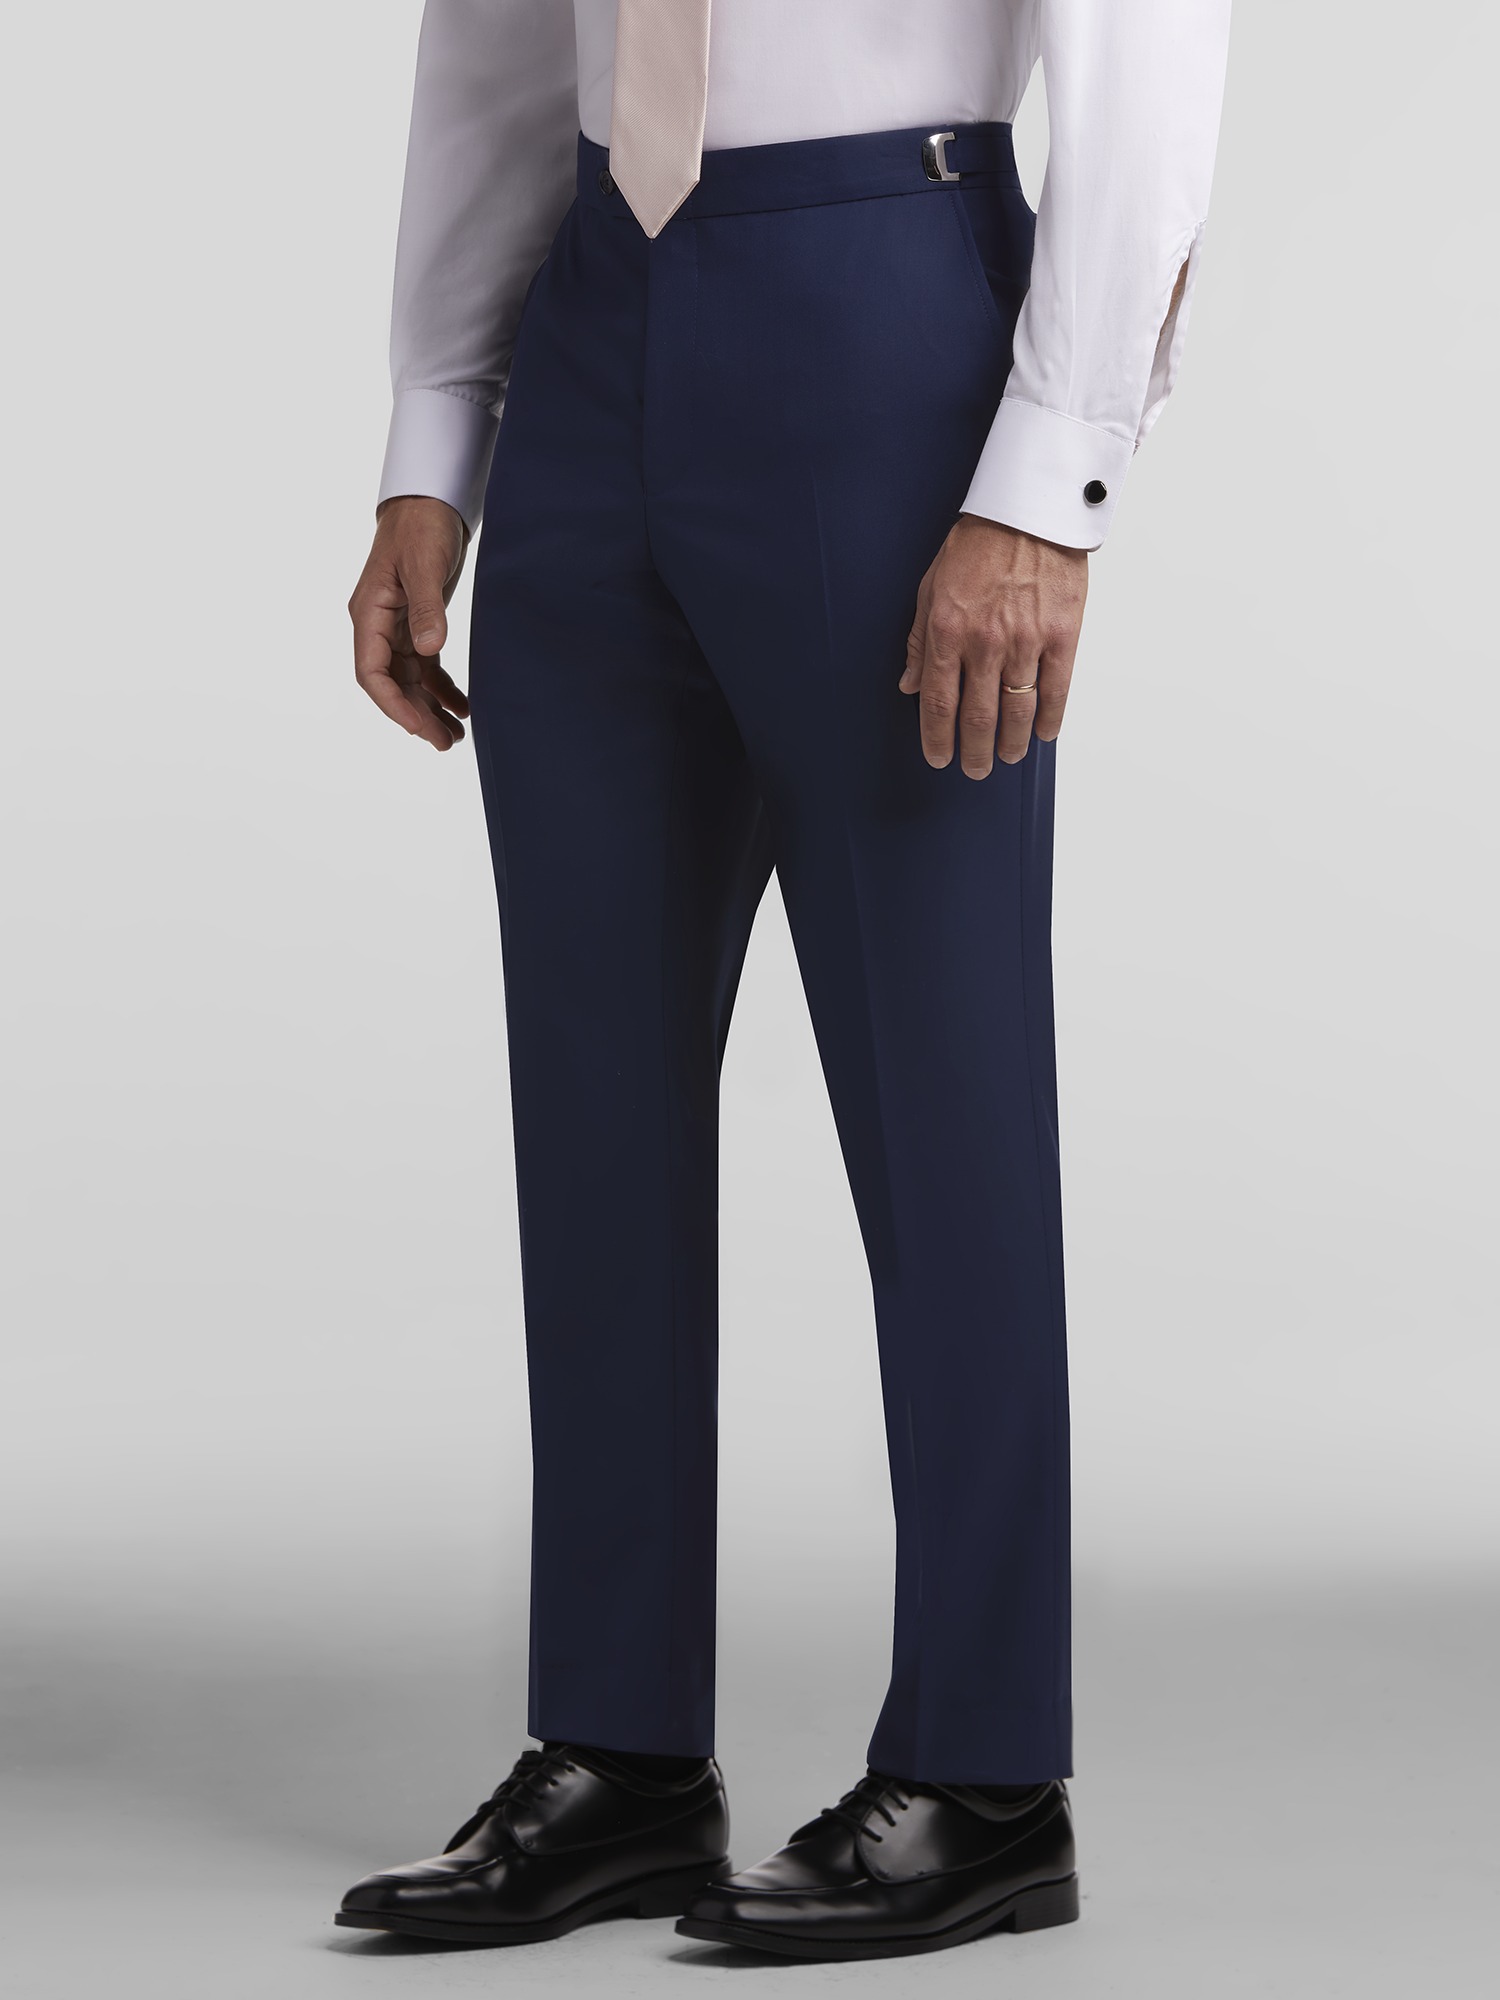 Navy blue tuxedo pants for dressing up daily